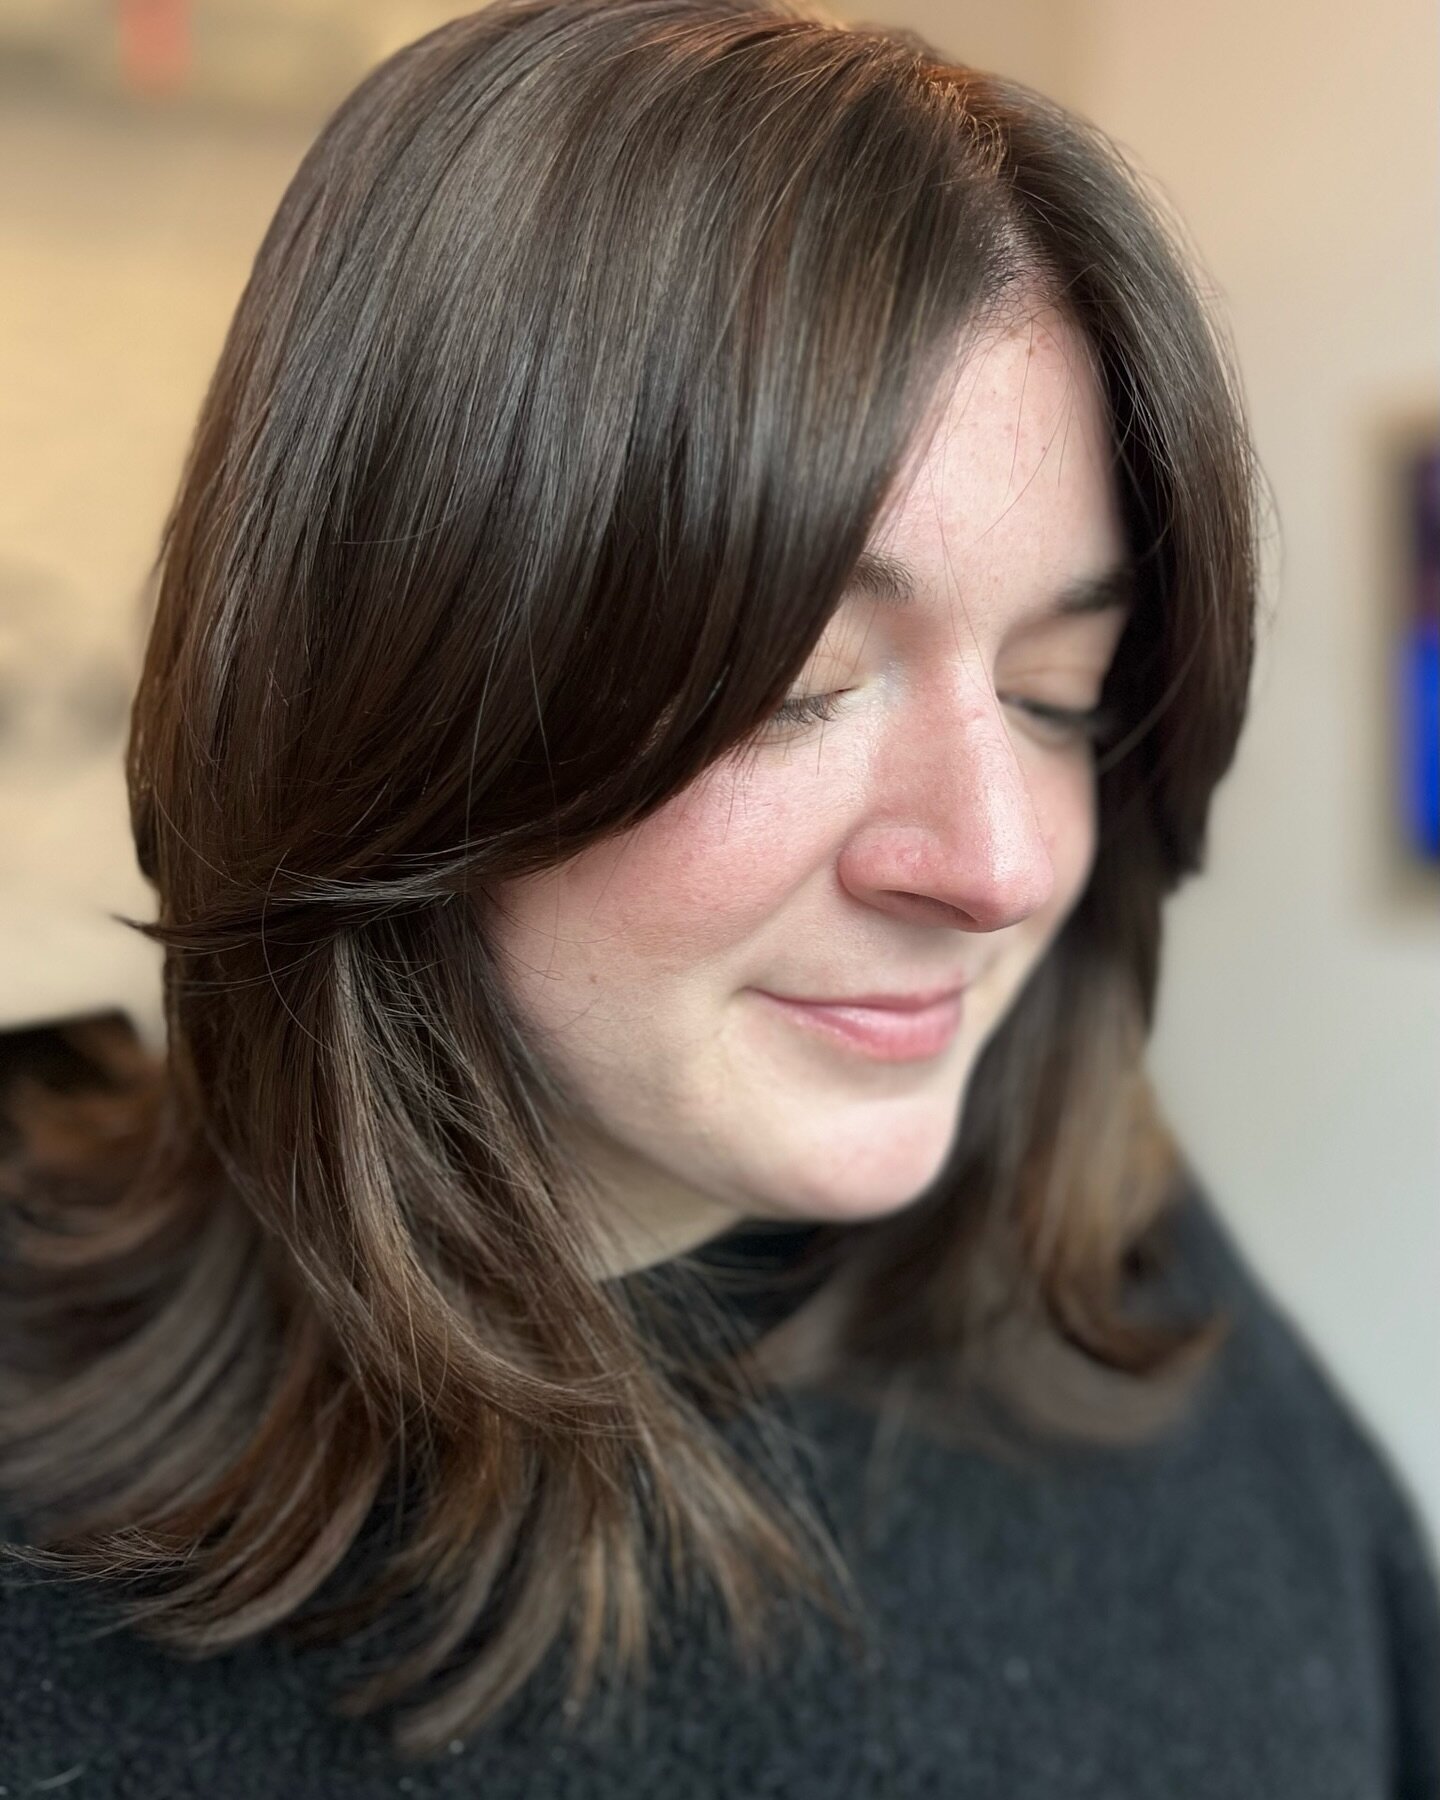 This one is allllllll about the dimension, which was achieved by layering a luxurious chocolate brunette over old copper highlights. Sometimes working with what ya got is the best way to get a stunning new look!

#hairinspo #hairinspiration #freshcol